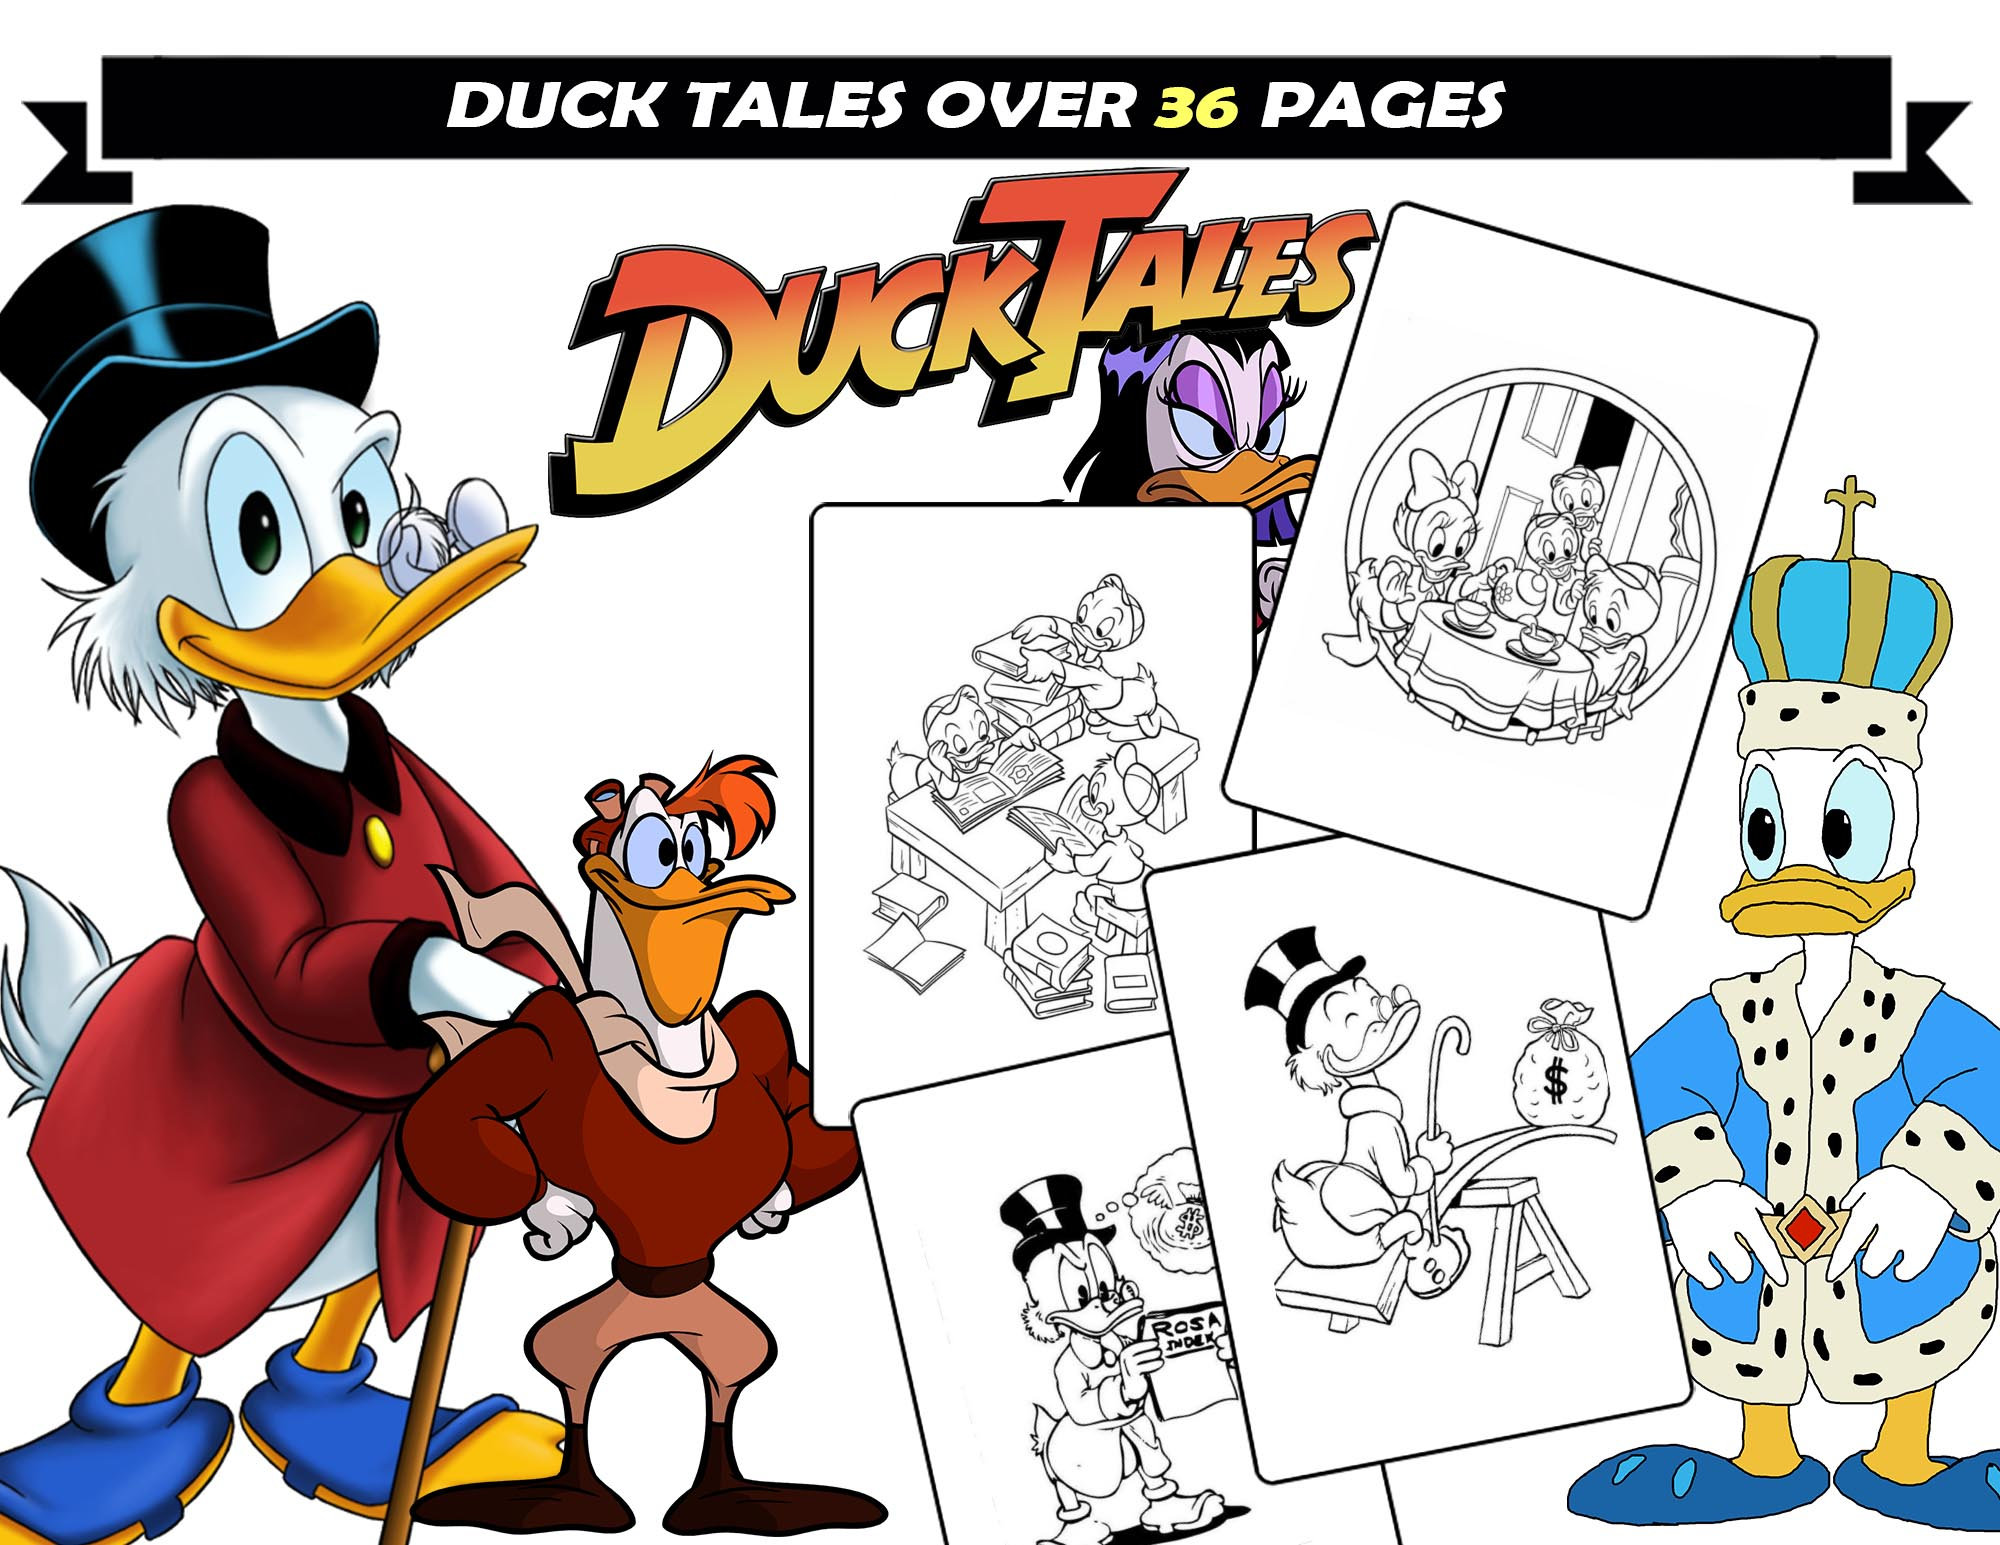 Duck tales coloring pages for kids scrooge louie dewey huey cartoon characters for coloring instant download printable coloring book